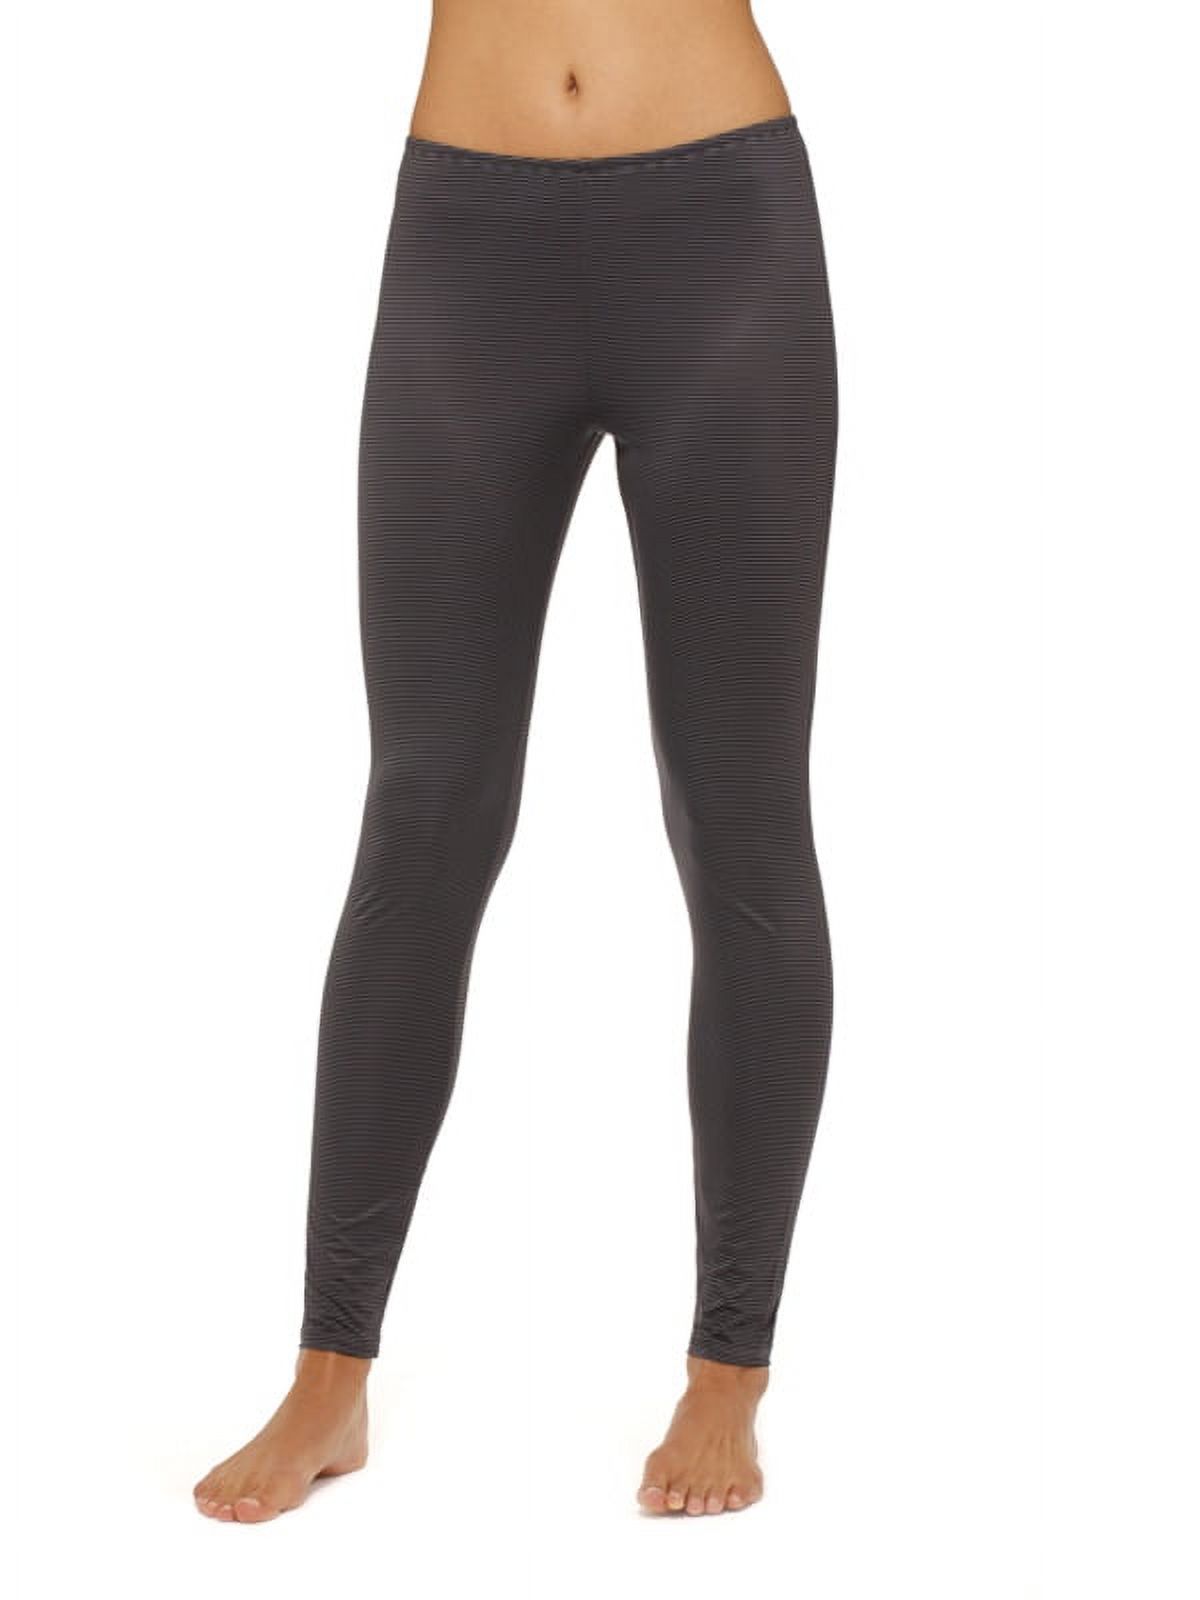 ClimateRight by Cuddl Duds Women's and Women's Plus Stretch Microfiber Base Layer Legging - image 1 of 3